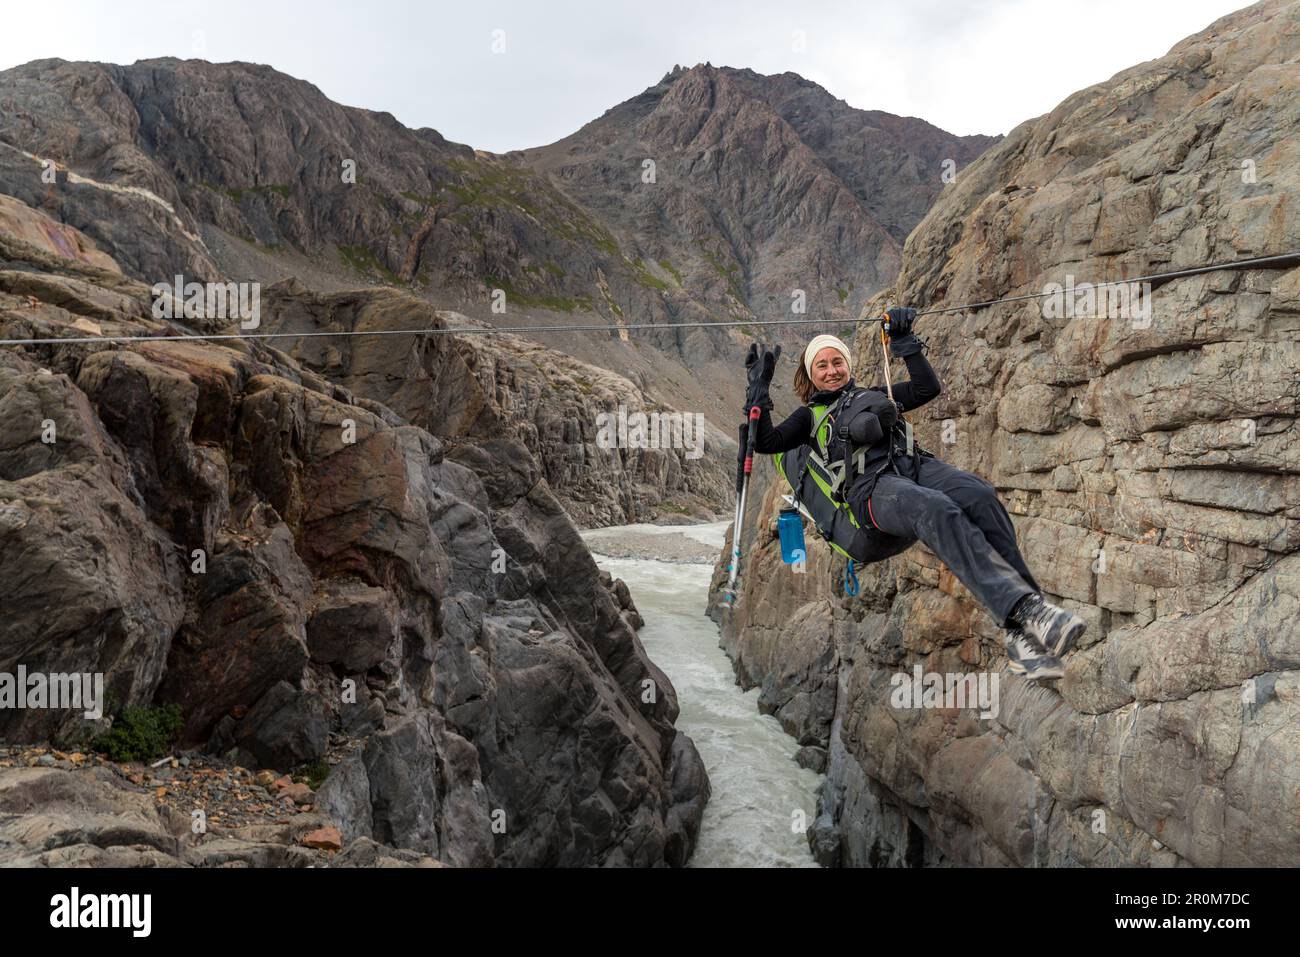 Mountaineer crosses the Rio Tunel on the Paso del Viento with a zip line (Tirolesa), Los Glaciares National Park, Patagonia, Argentina Stock Photo